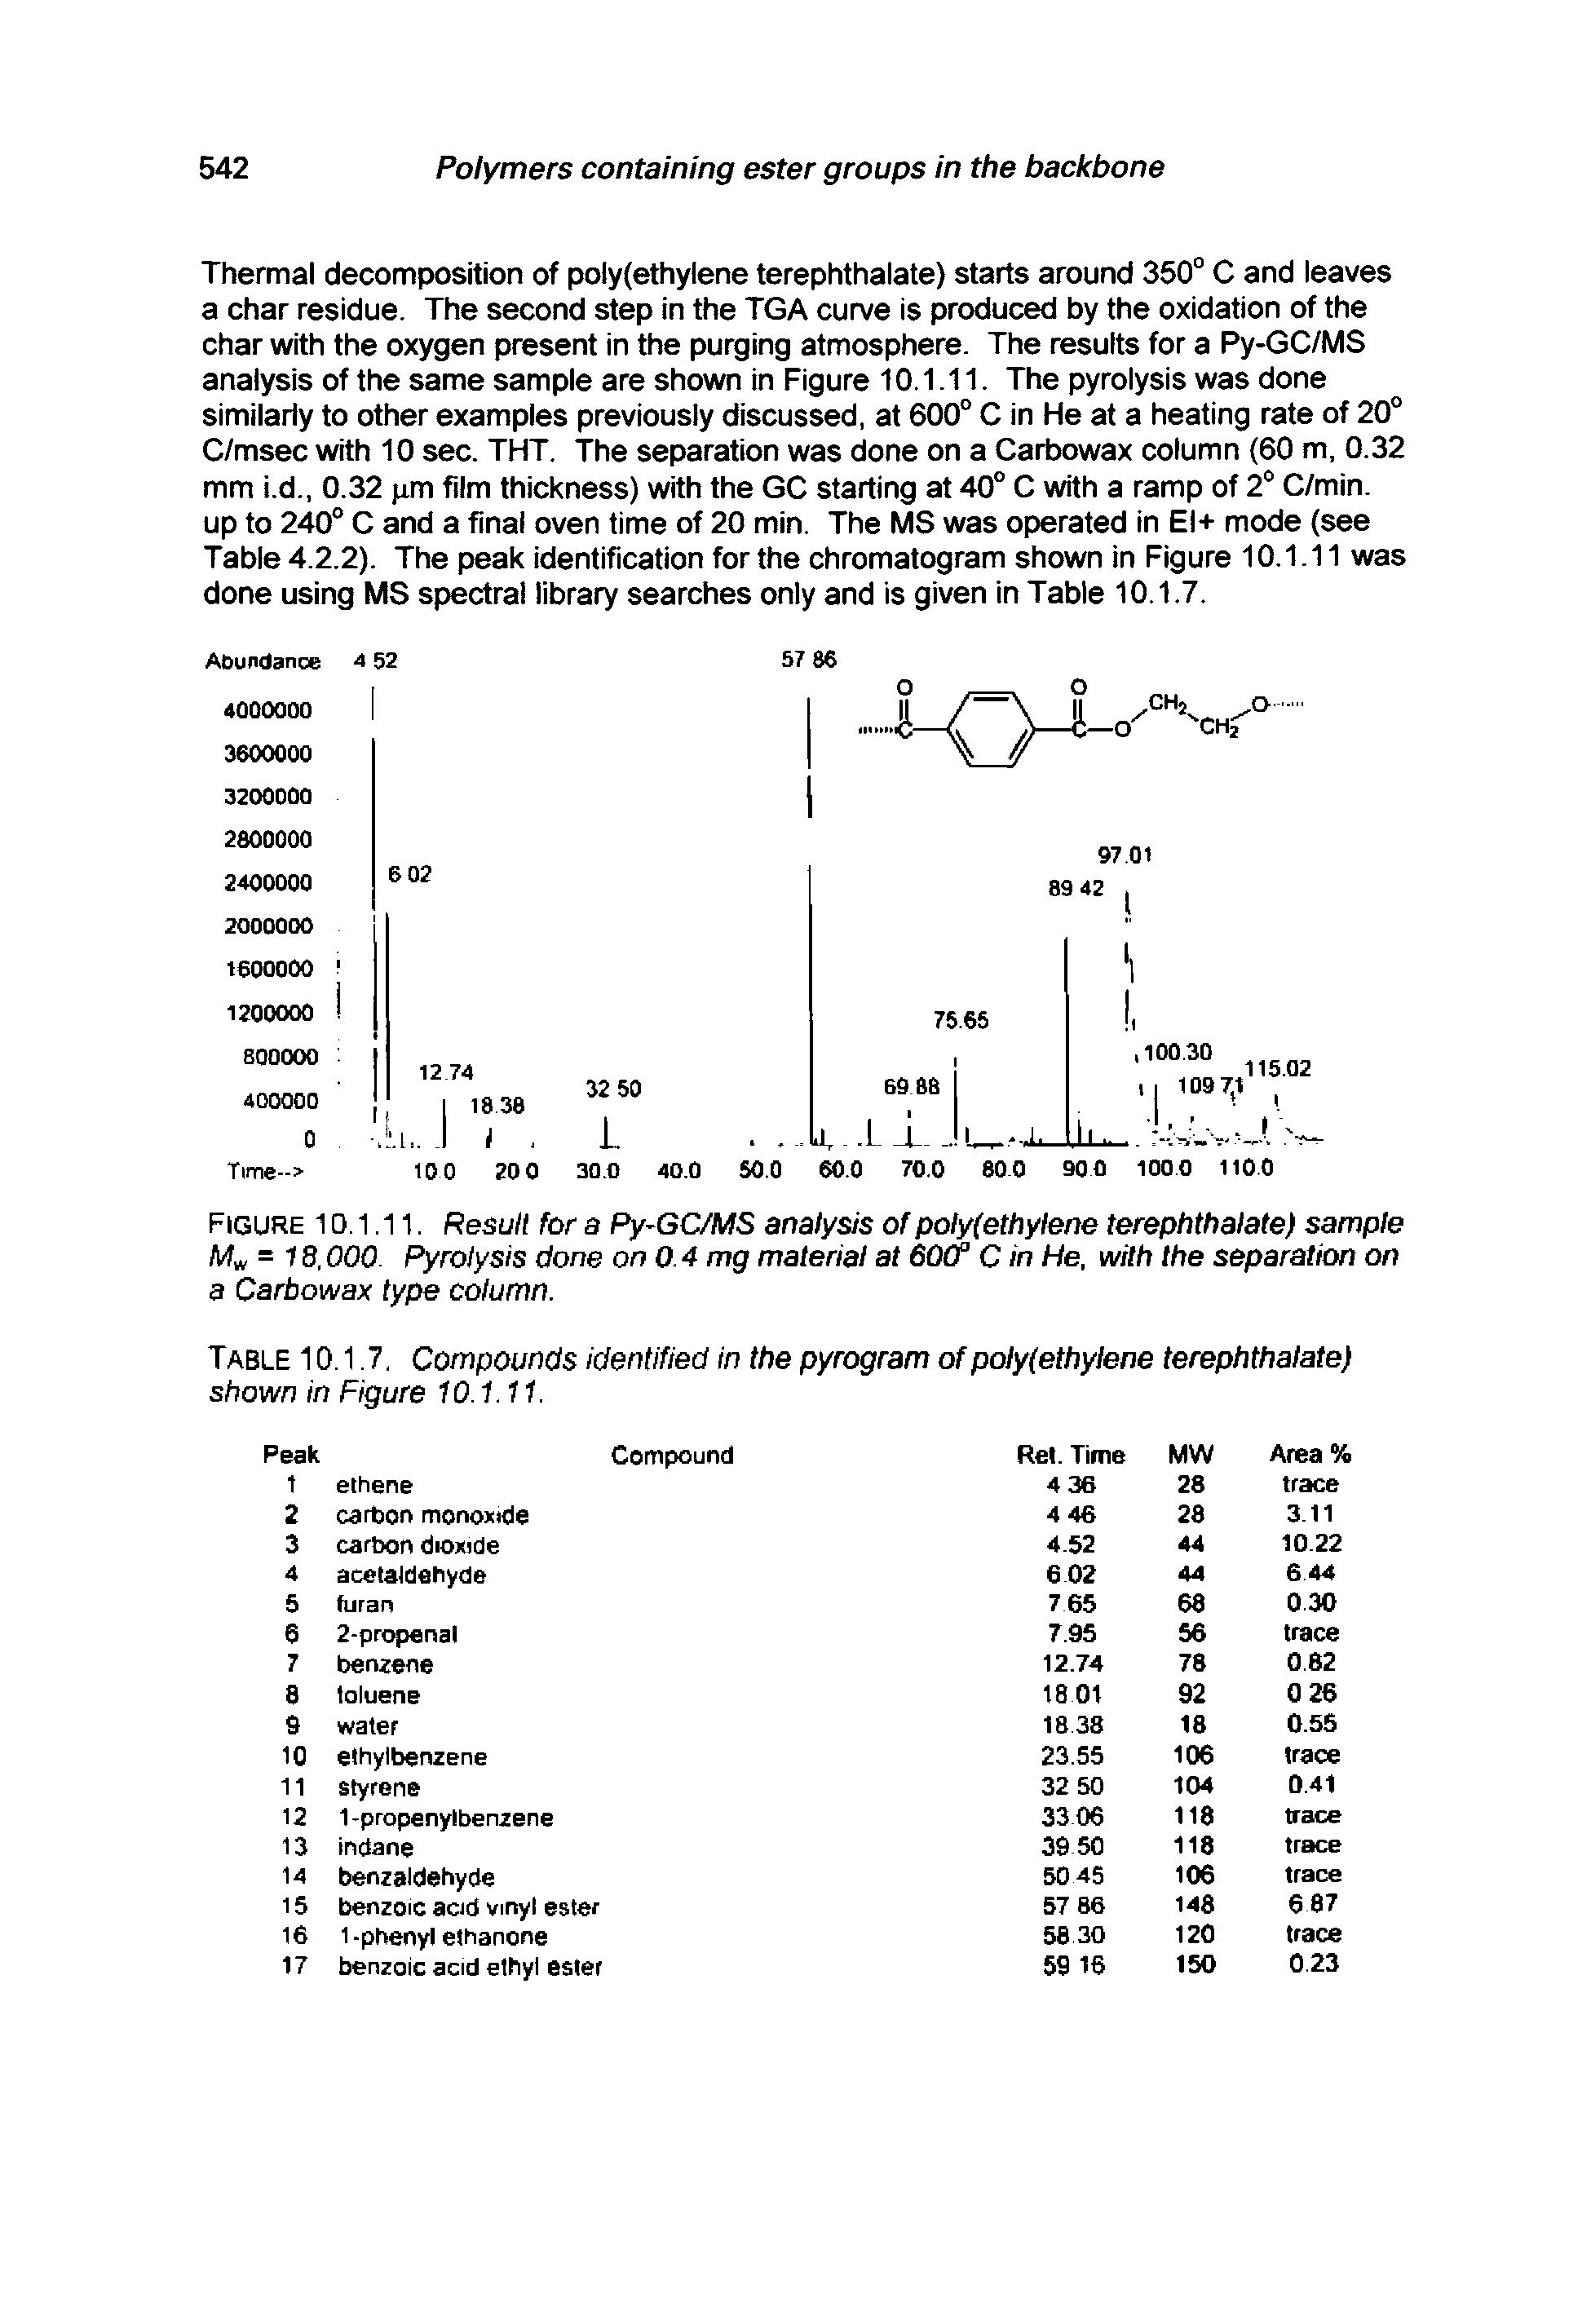 Table 10.1.7. Compounds identified in the pyrogram of polyfethylene terephthalate) shown in Figure 10.1.11.